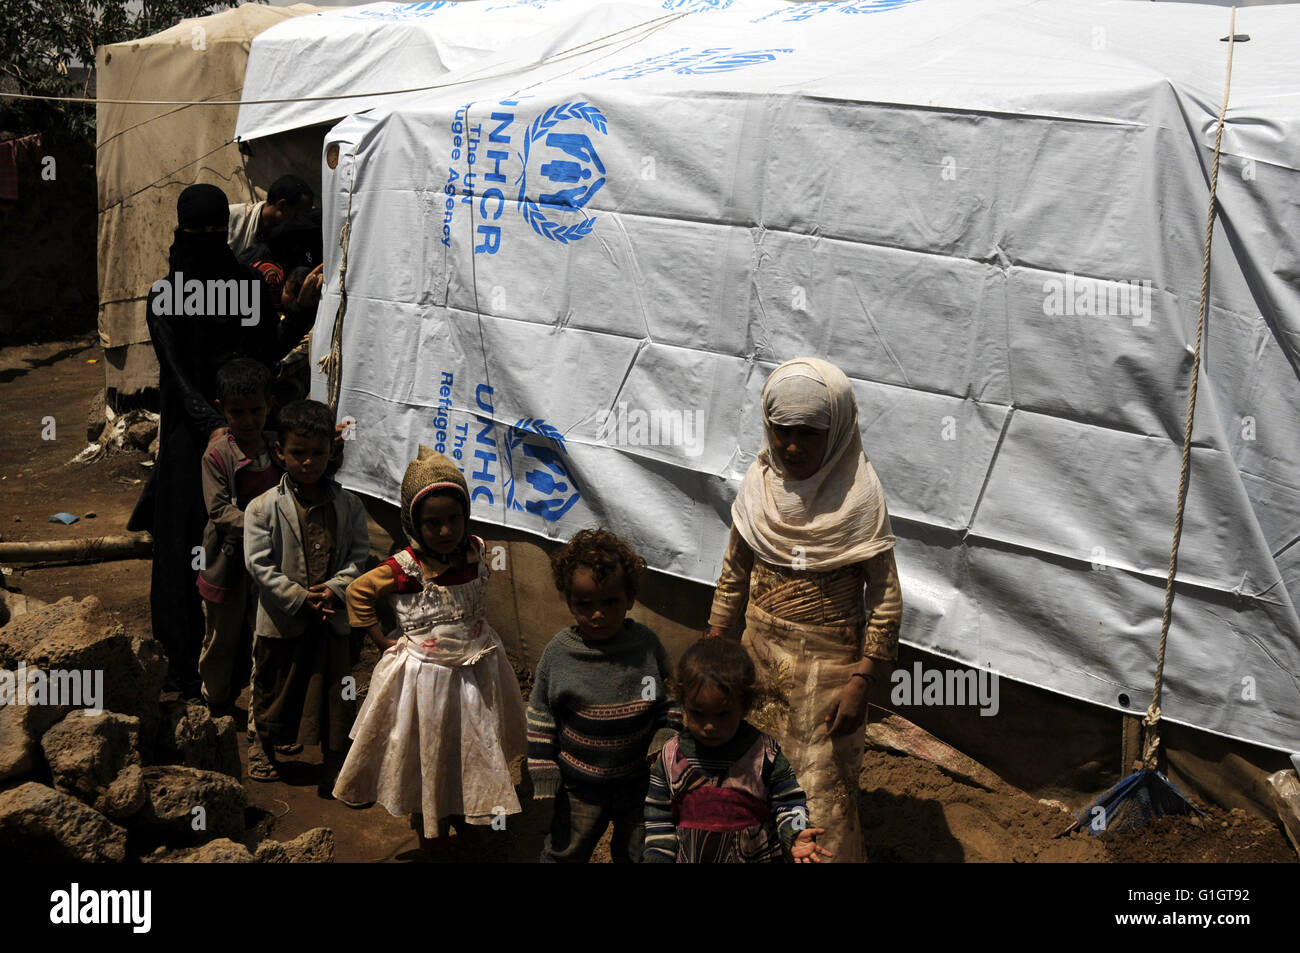 Sanaa, Yemen. 14th May, 2016. Yemeni internally displaced family stand outside their makeshift shelter at a camp on the outskirts of Amran province, Yemen, on May 14, 2016. The ongoing conflict in Yemen has forcibly displaced more than 2.4 million people in Yemen. © Hani Ali/Xinhua/Alamy Live News Stock Photo